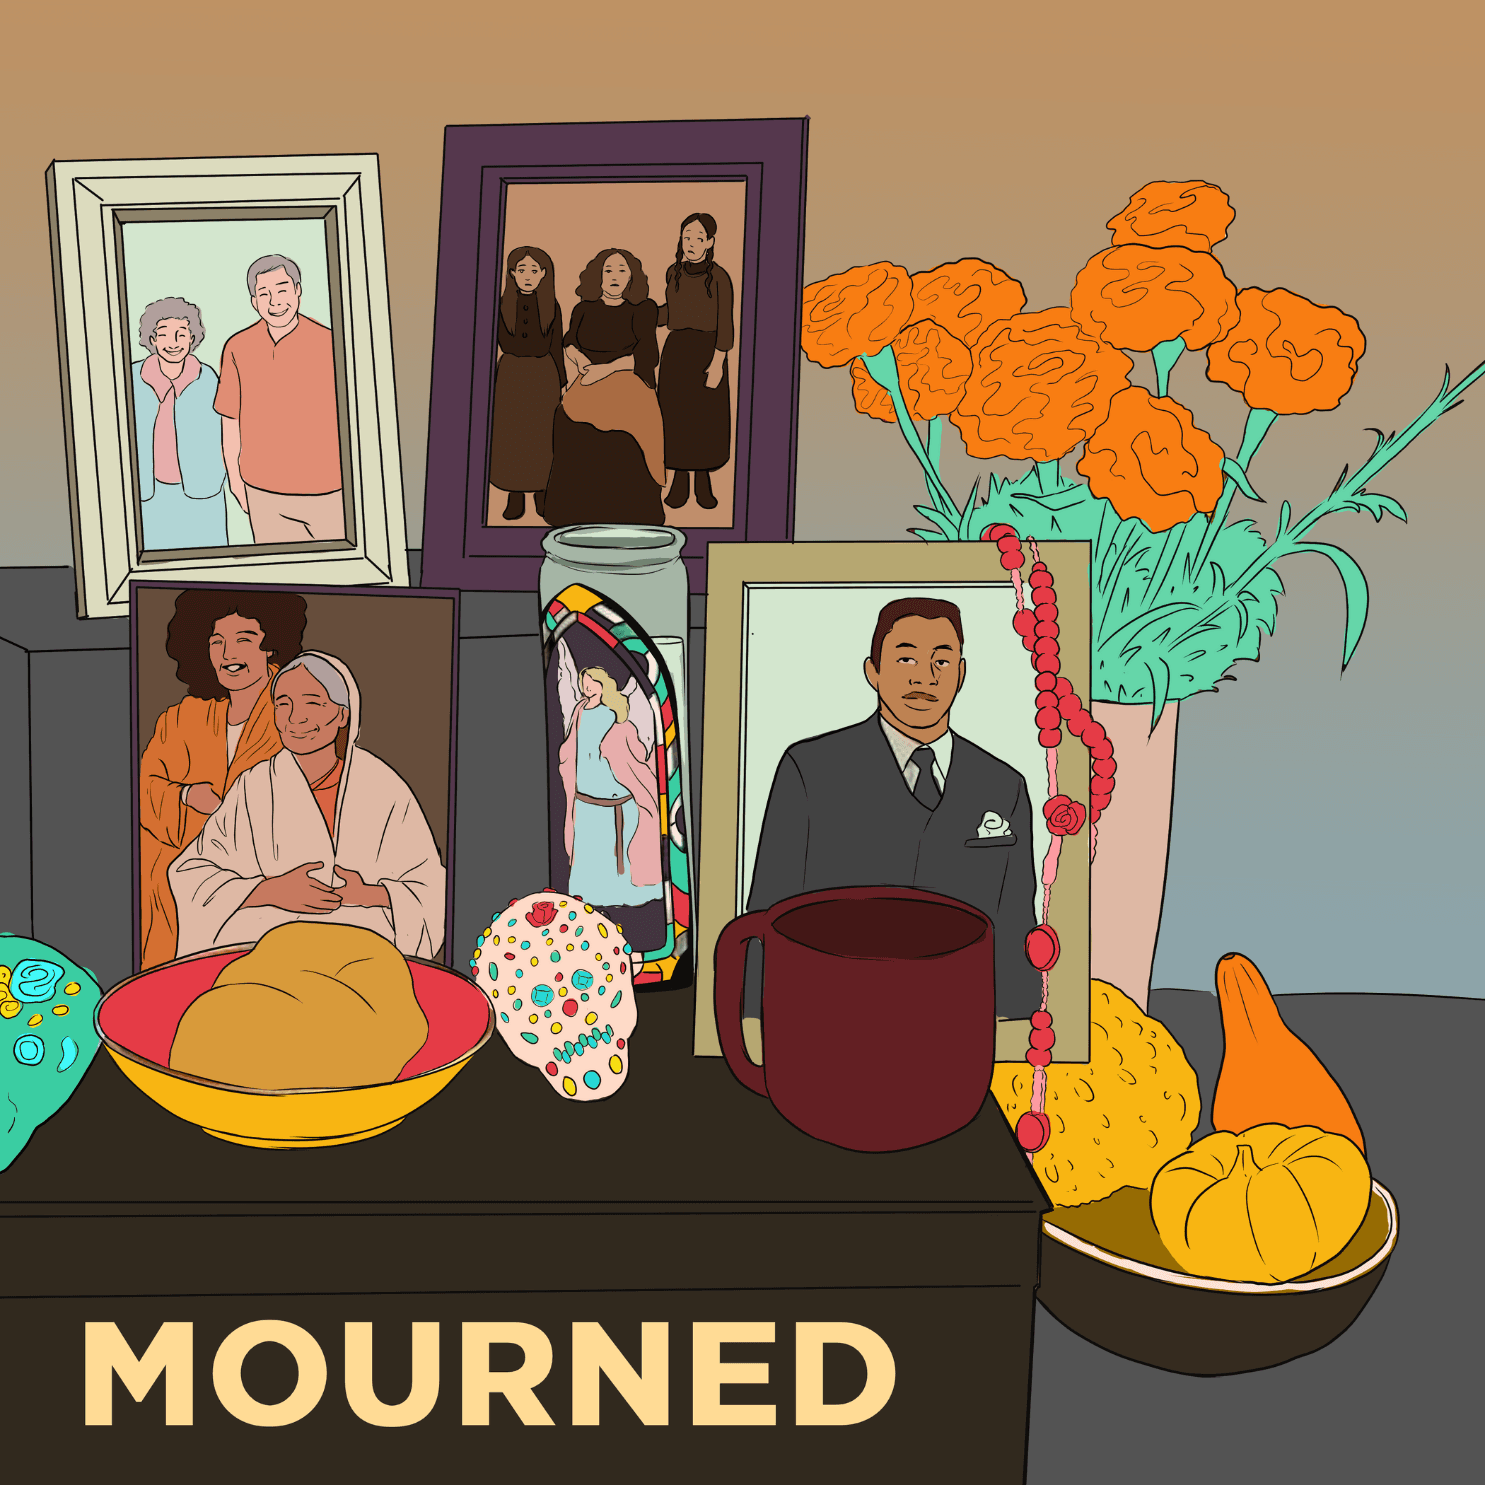 Thumbnail for "Mourned: Life After Losing A Parent".